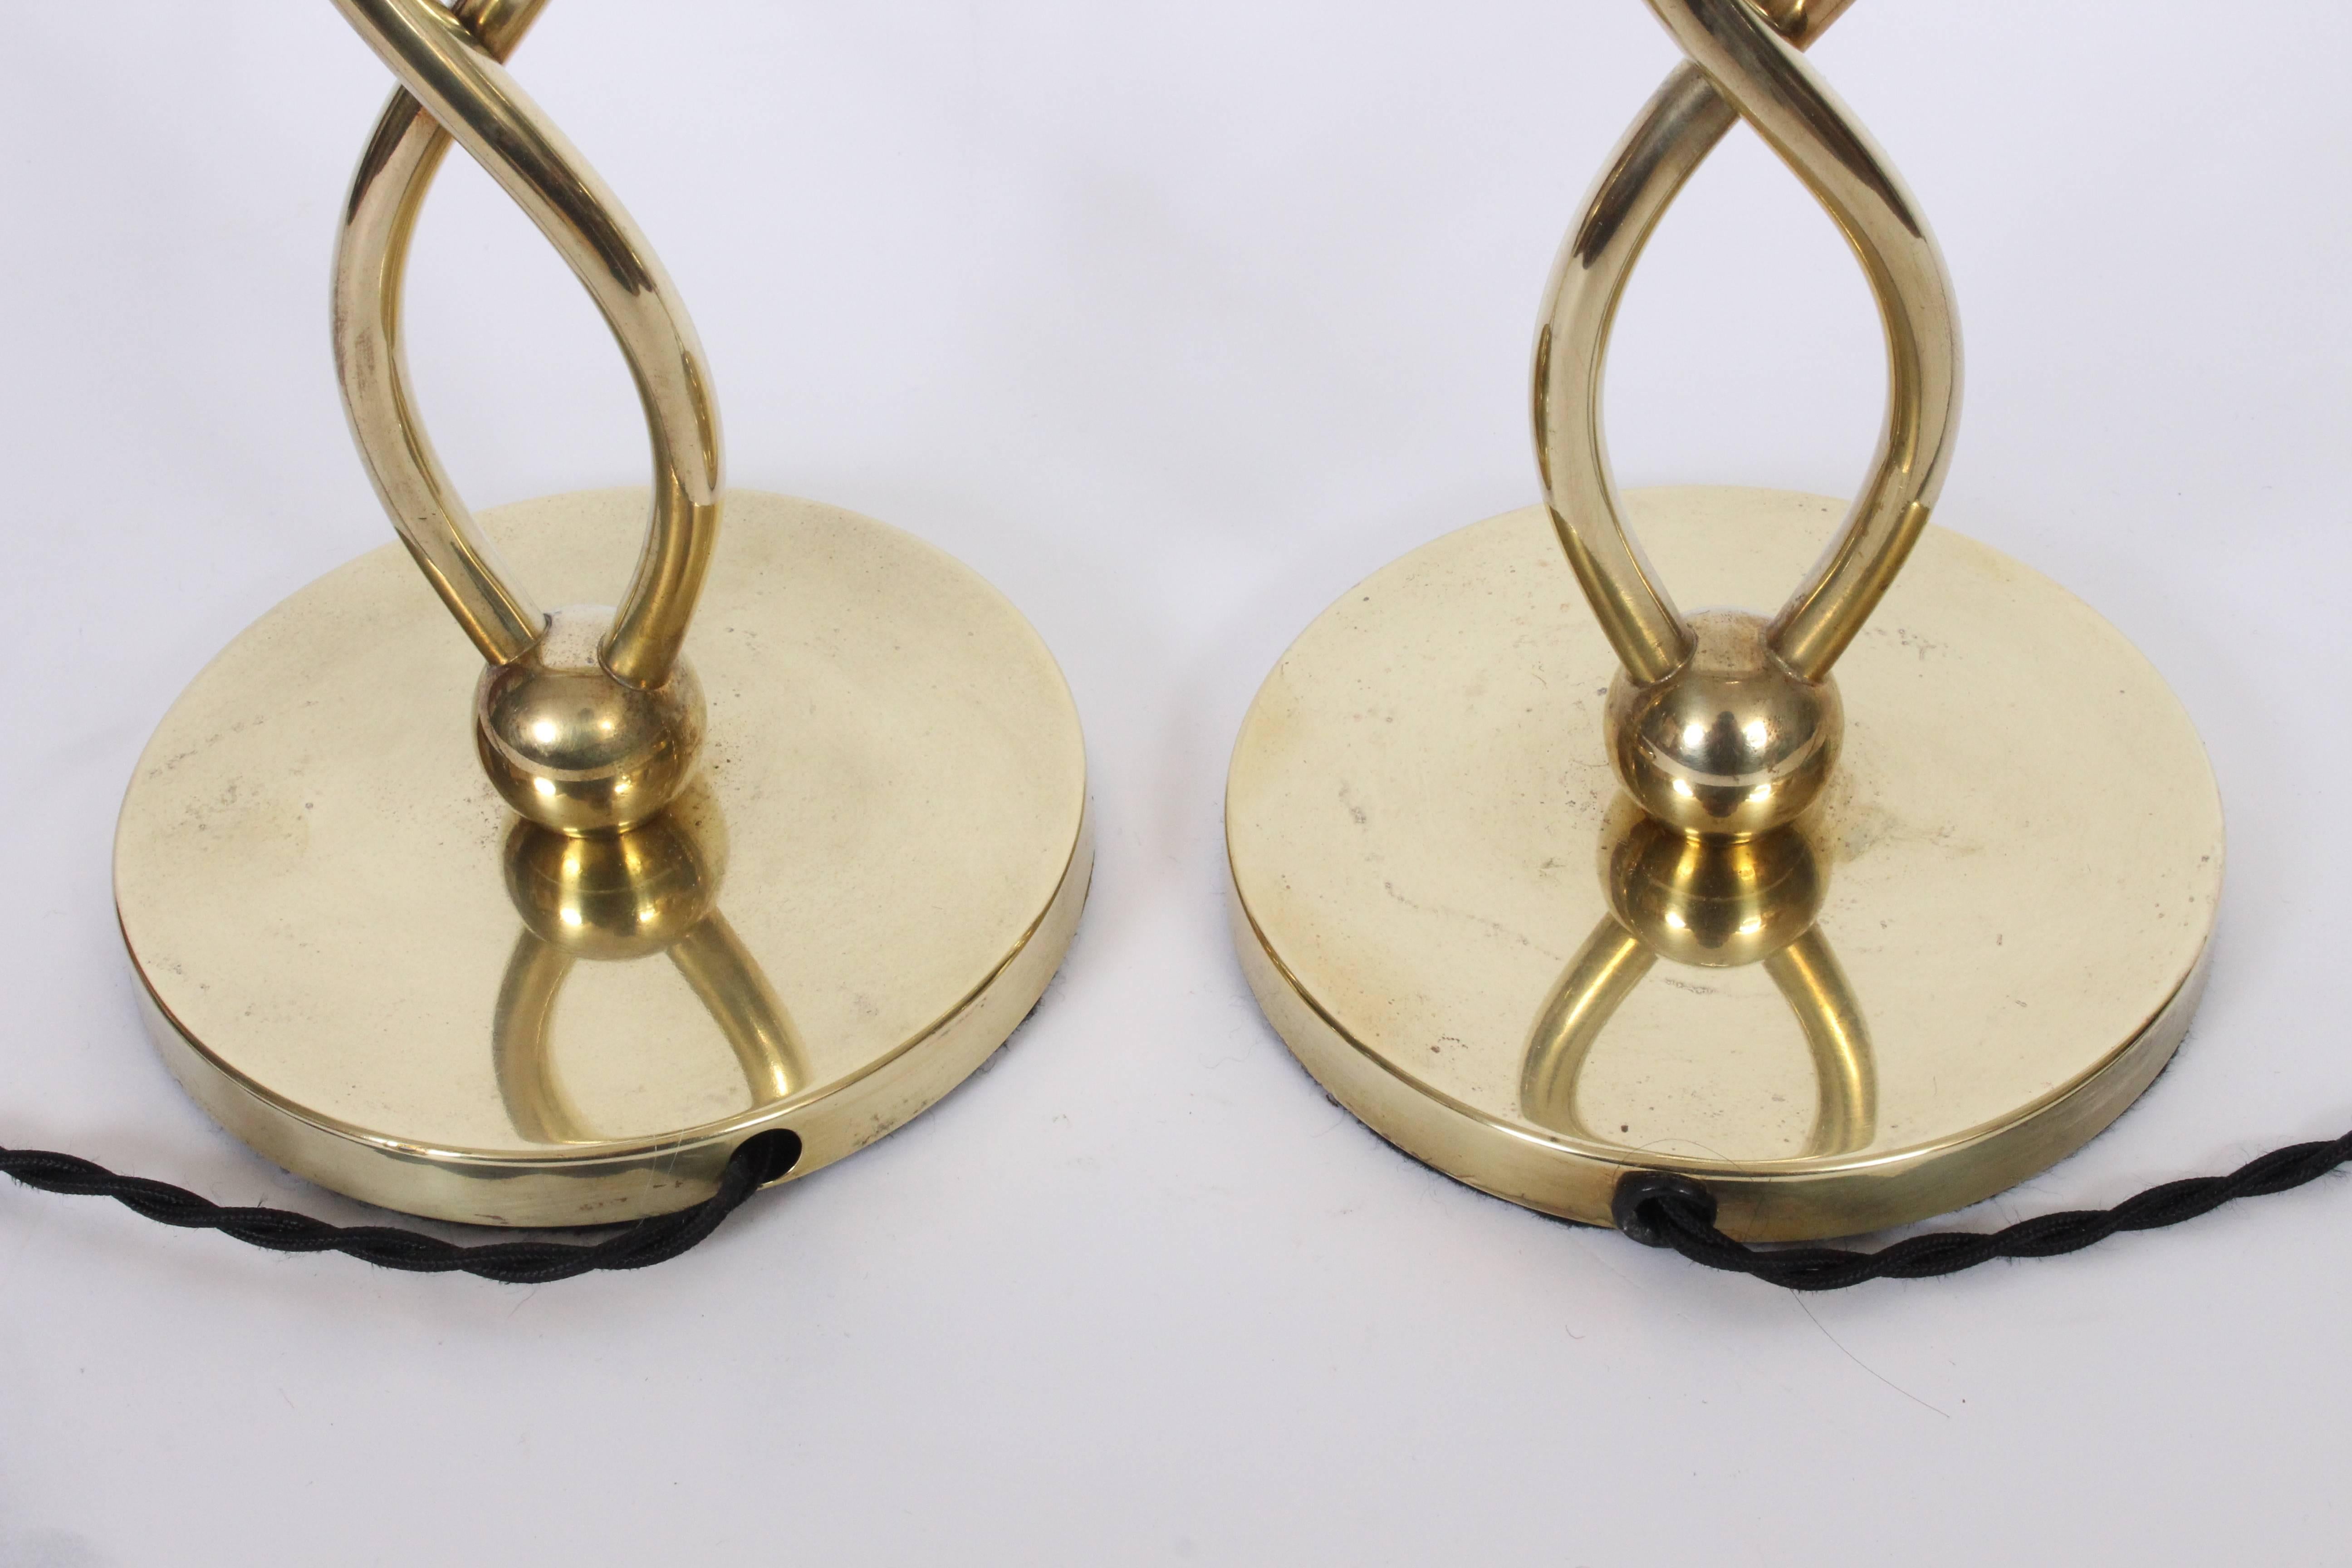 20th Century Pair of Hand Buffed Brass Double Twist Bedside Lamps, C. 1950